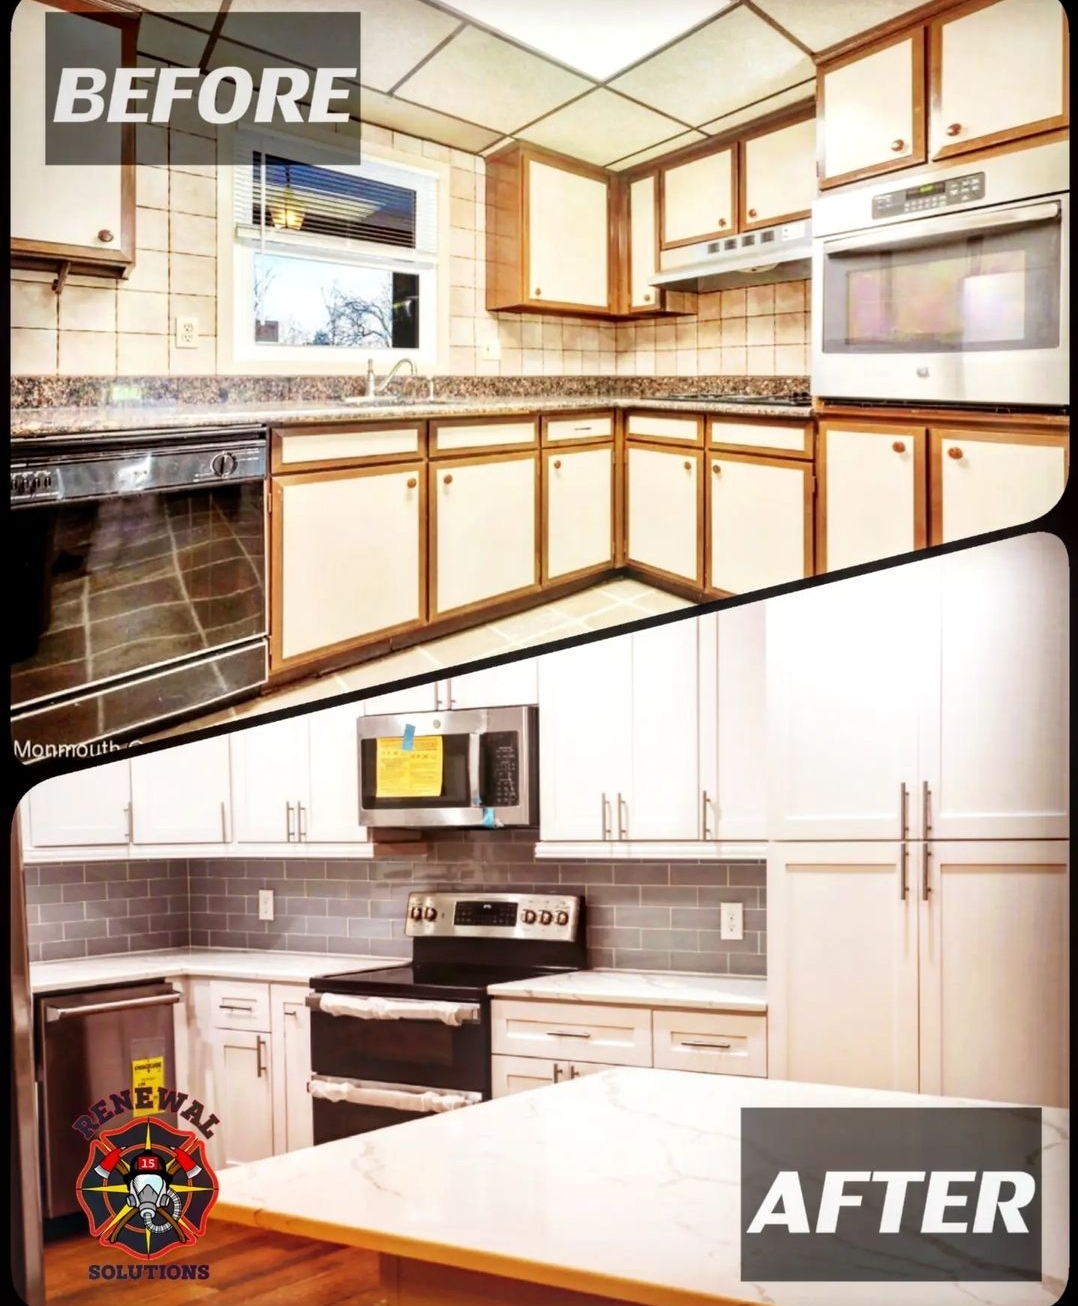 A before and after picture of what our general contractors can do for your remodeling needs.